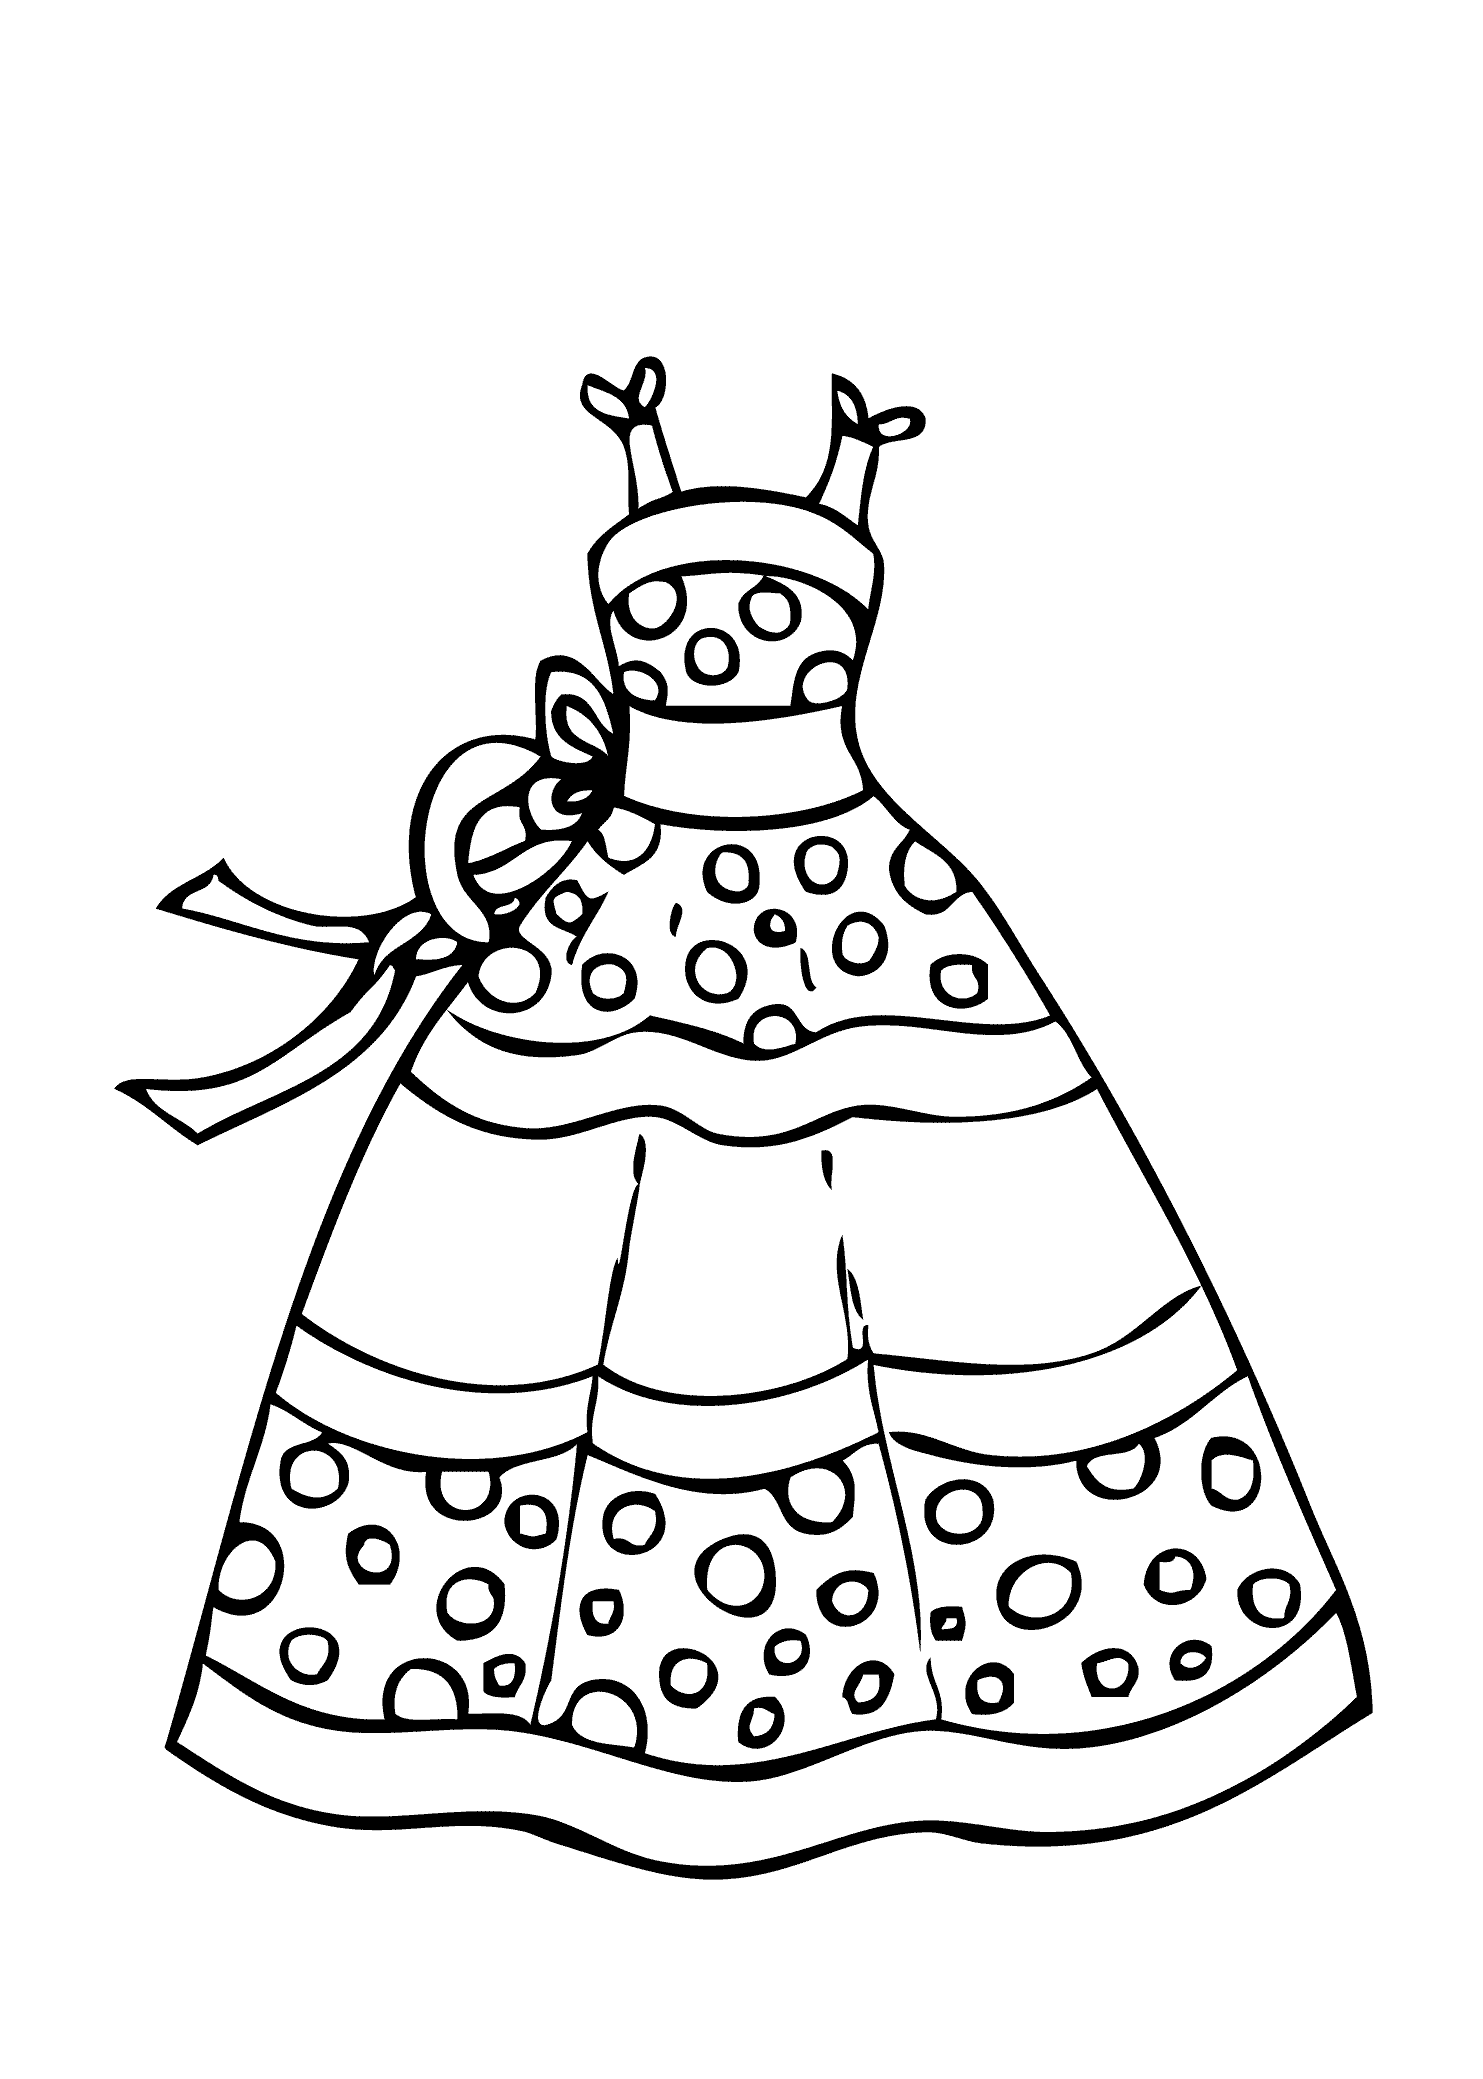 dress coloring pages to print dress coloring pages getcoloringpagescom dress coloring to print pages 